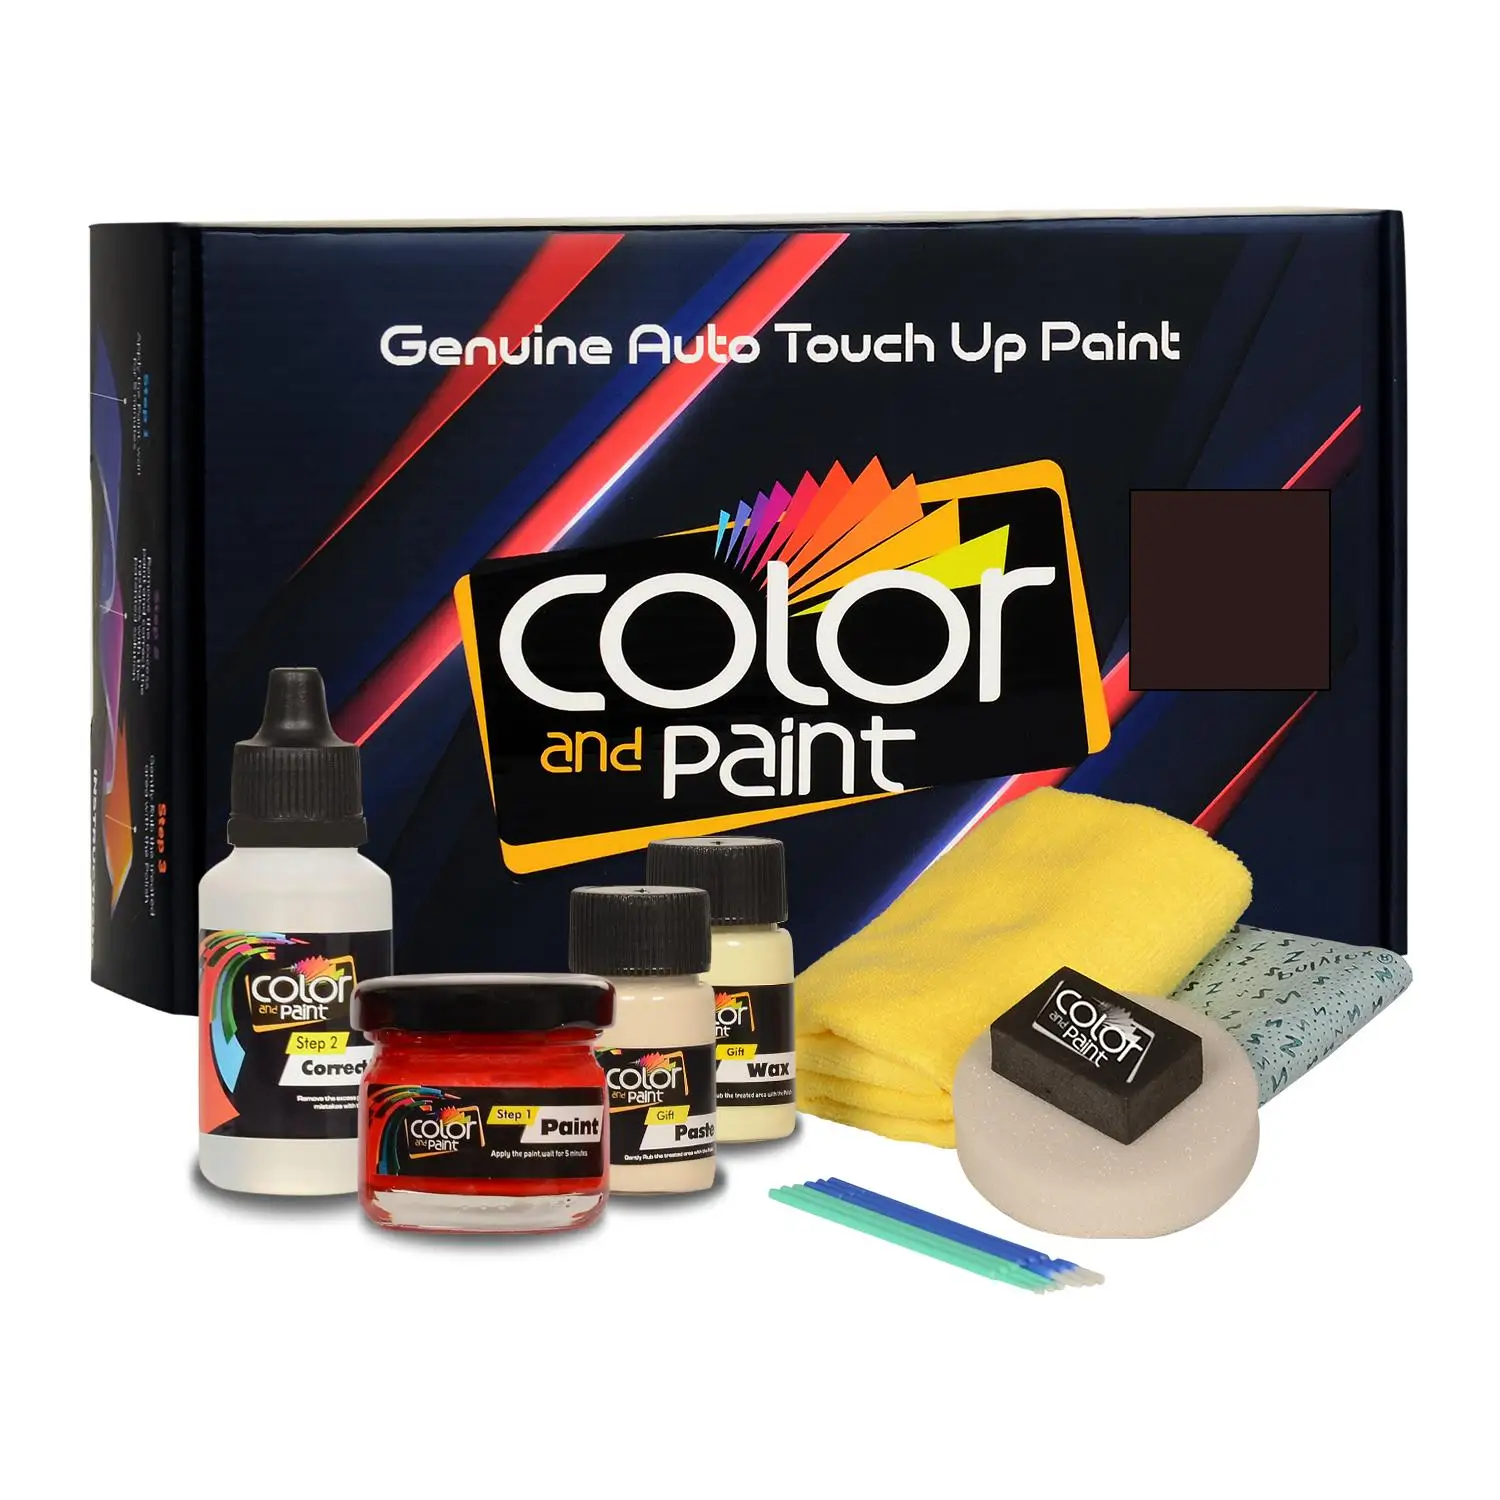 

Color and Paint compatible with Porsche Automotive Touch Up Paint-many MET - M8Y - Basic Care